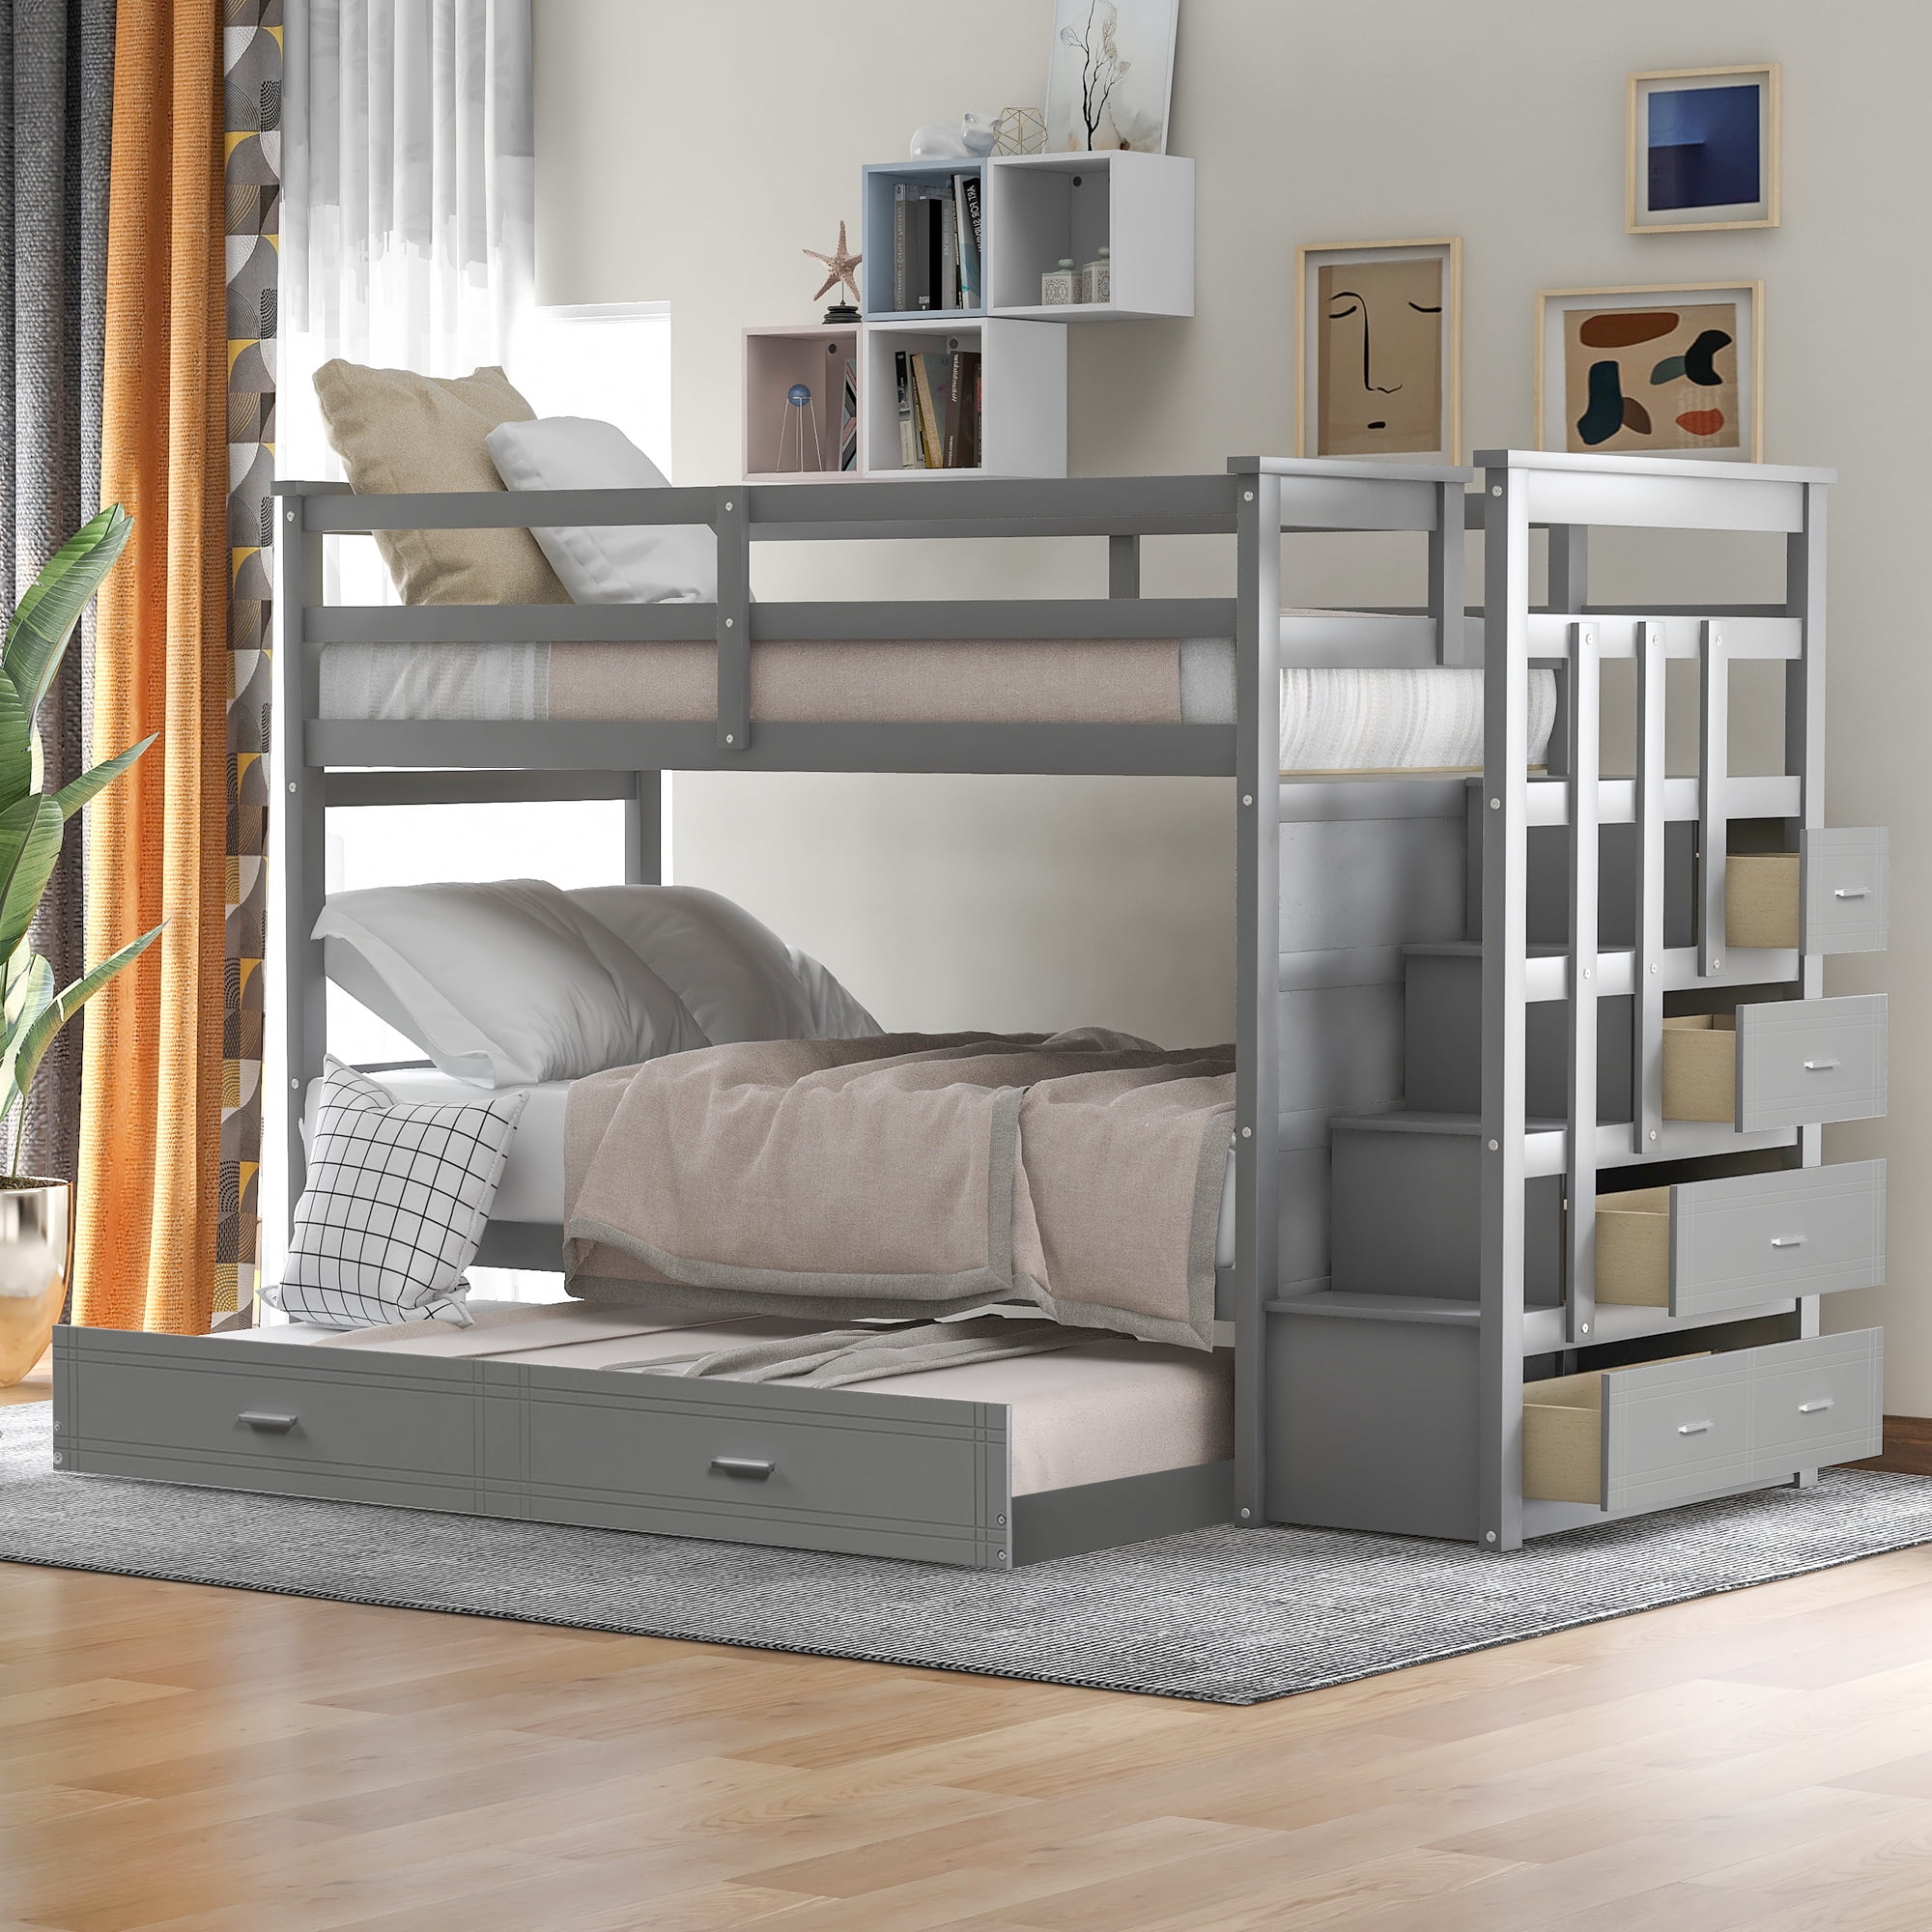 SEGMART 91.3'' x 42.4'' x 65.7'' Wood Bunk Bed Twin Over Twin Bunk Beds with Trundle Solid Wood